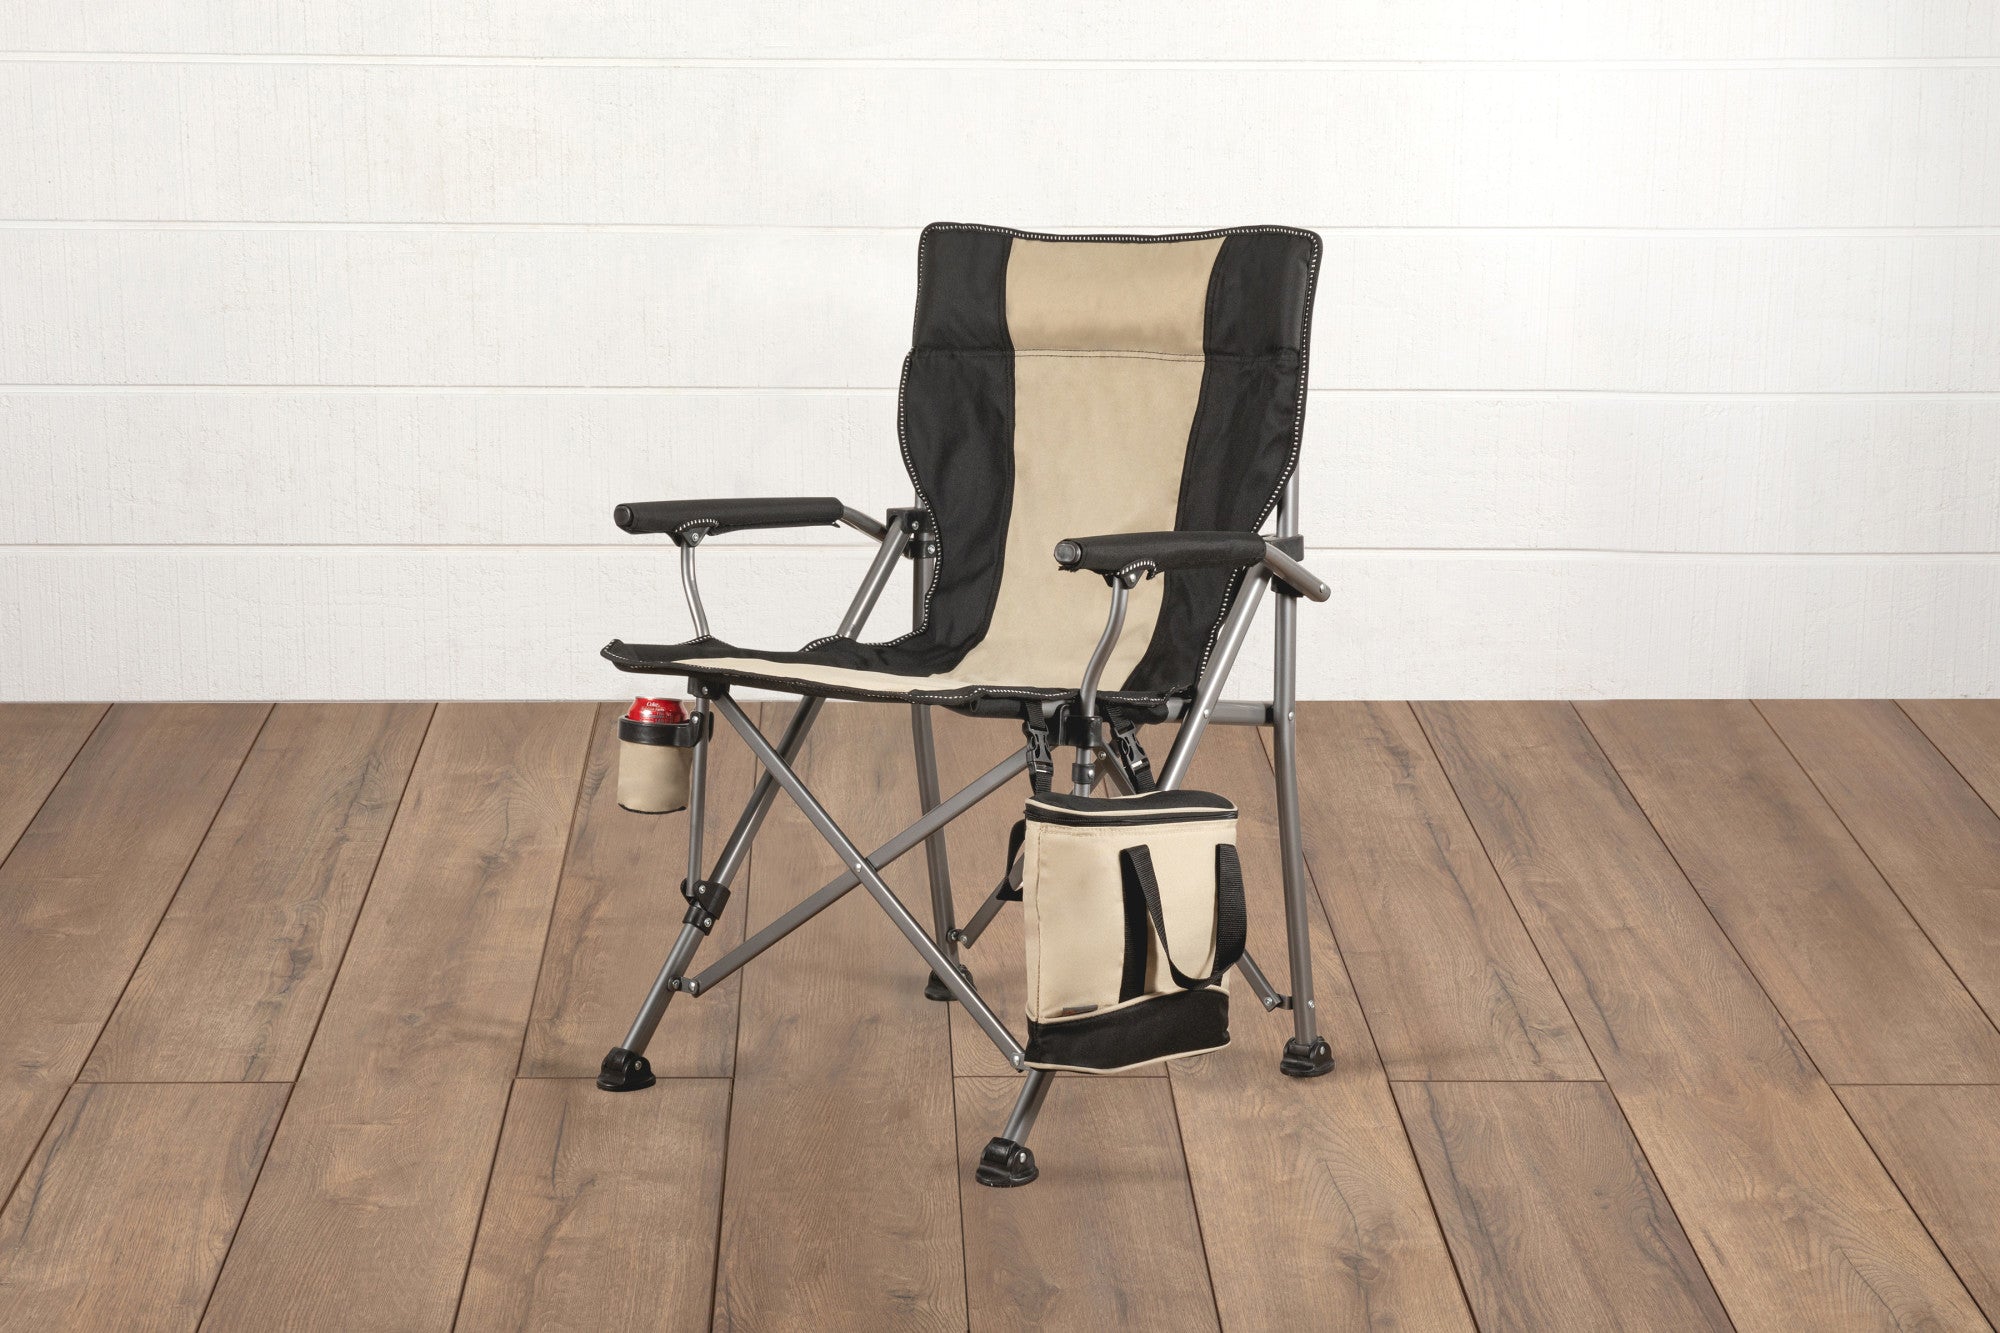 Cleveland Browns - Outlander XL Camping Chair with Cooler